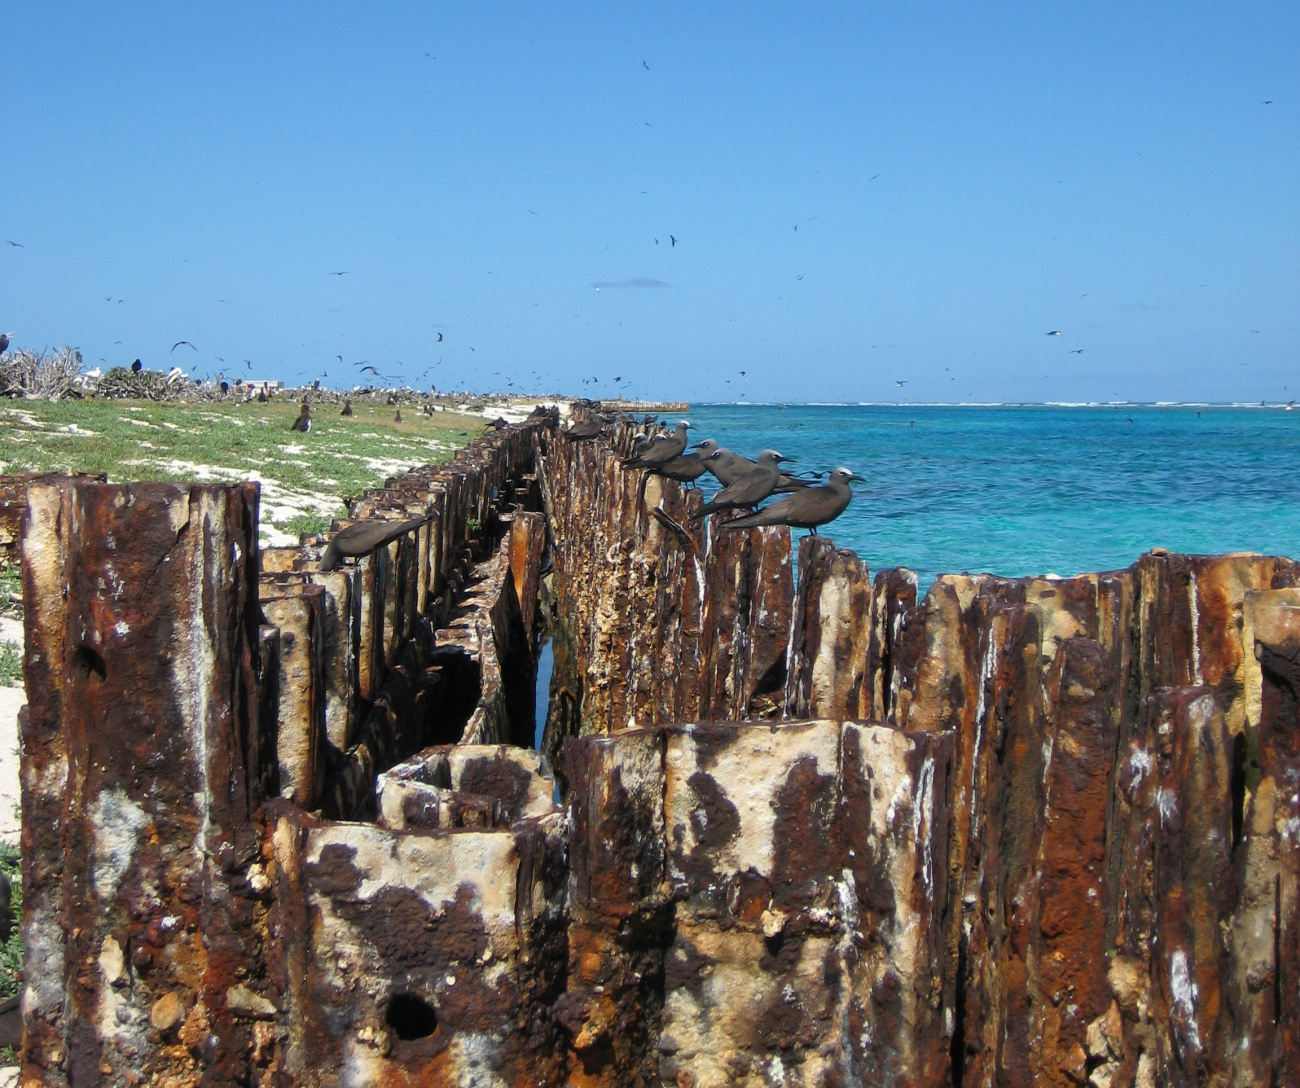 Part of the steel bulkhead put in place by Navy Seabees when they builtTern Island around French Frigate Shoals during World War II